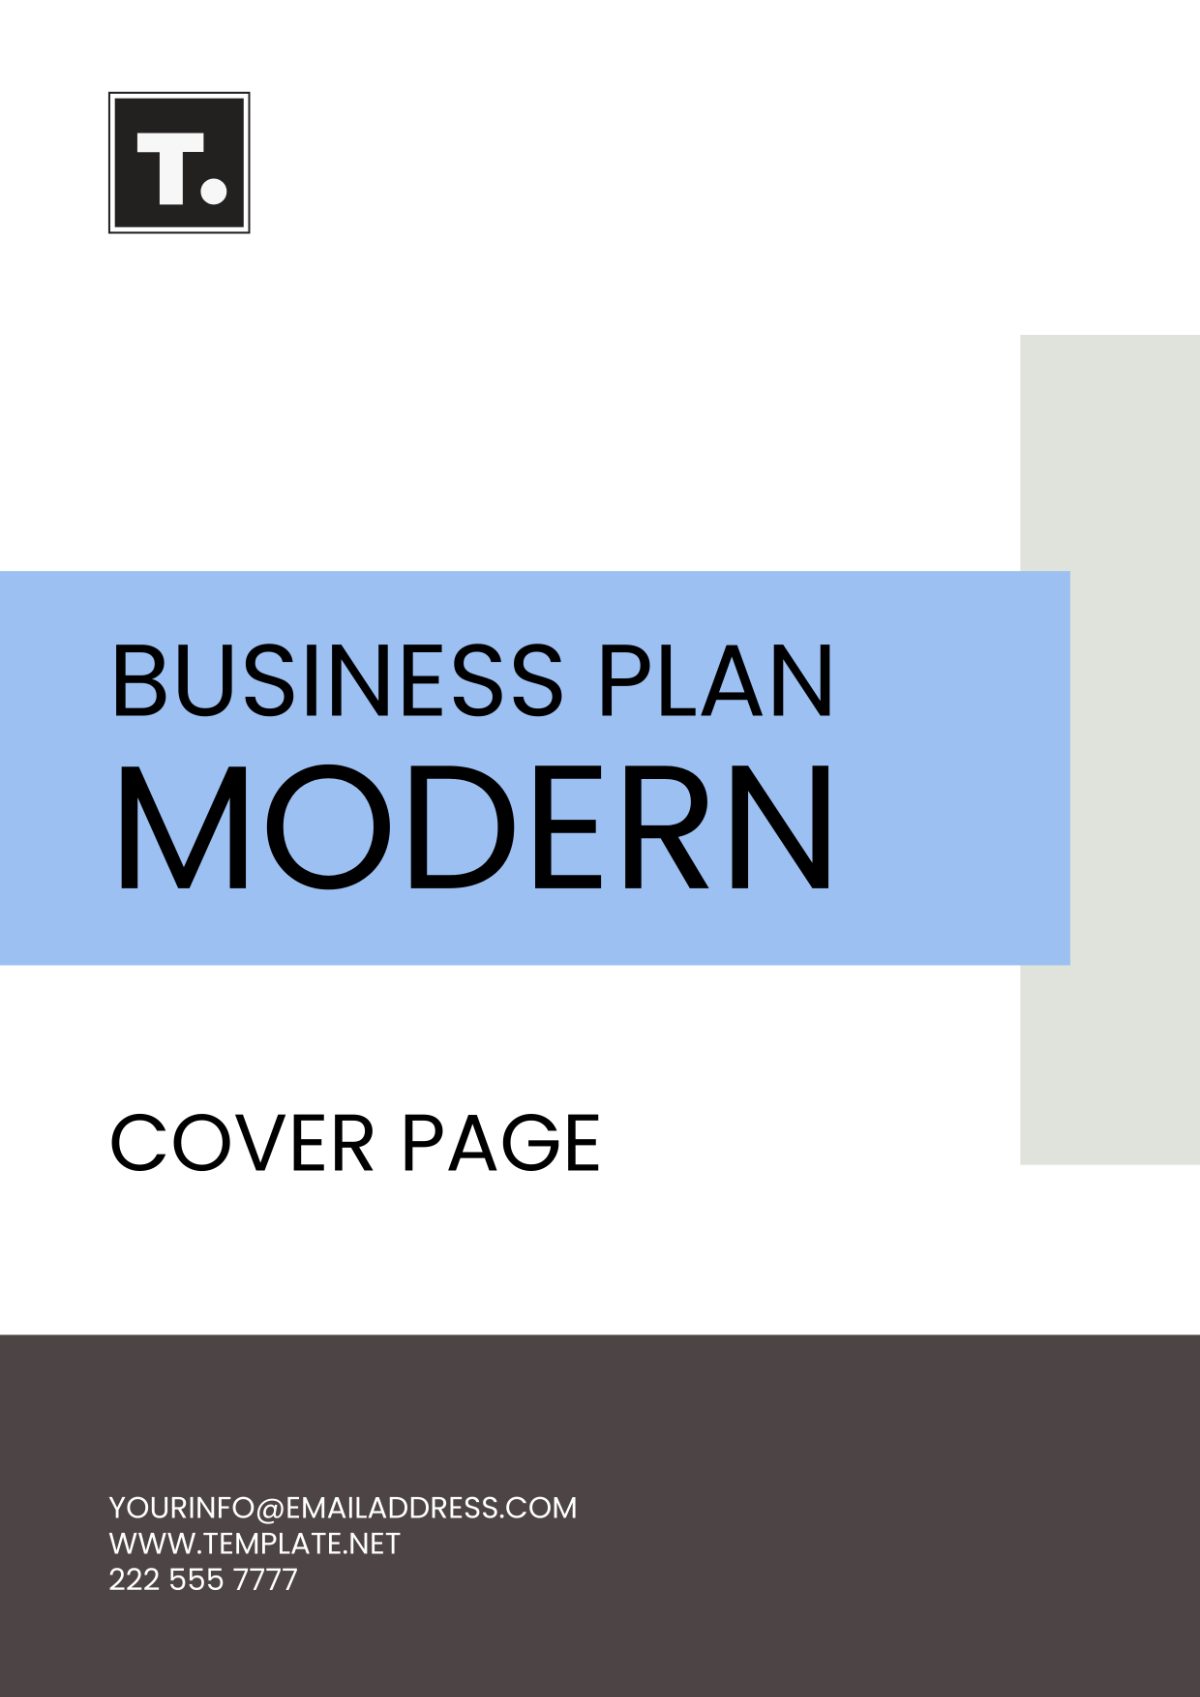 Free Business Plan Modern Cover Page Template